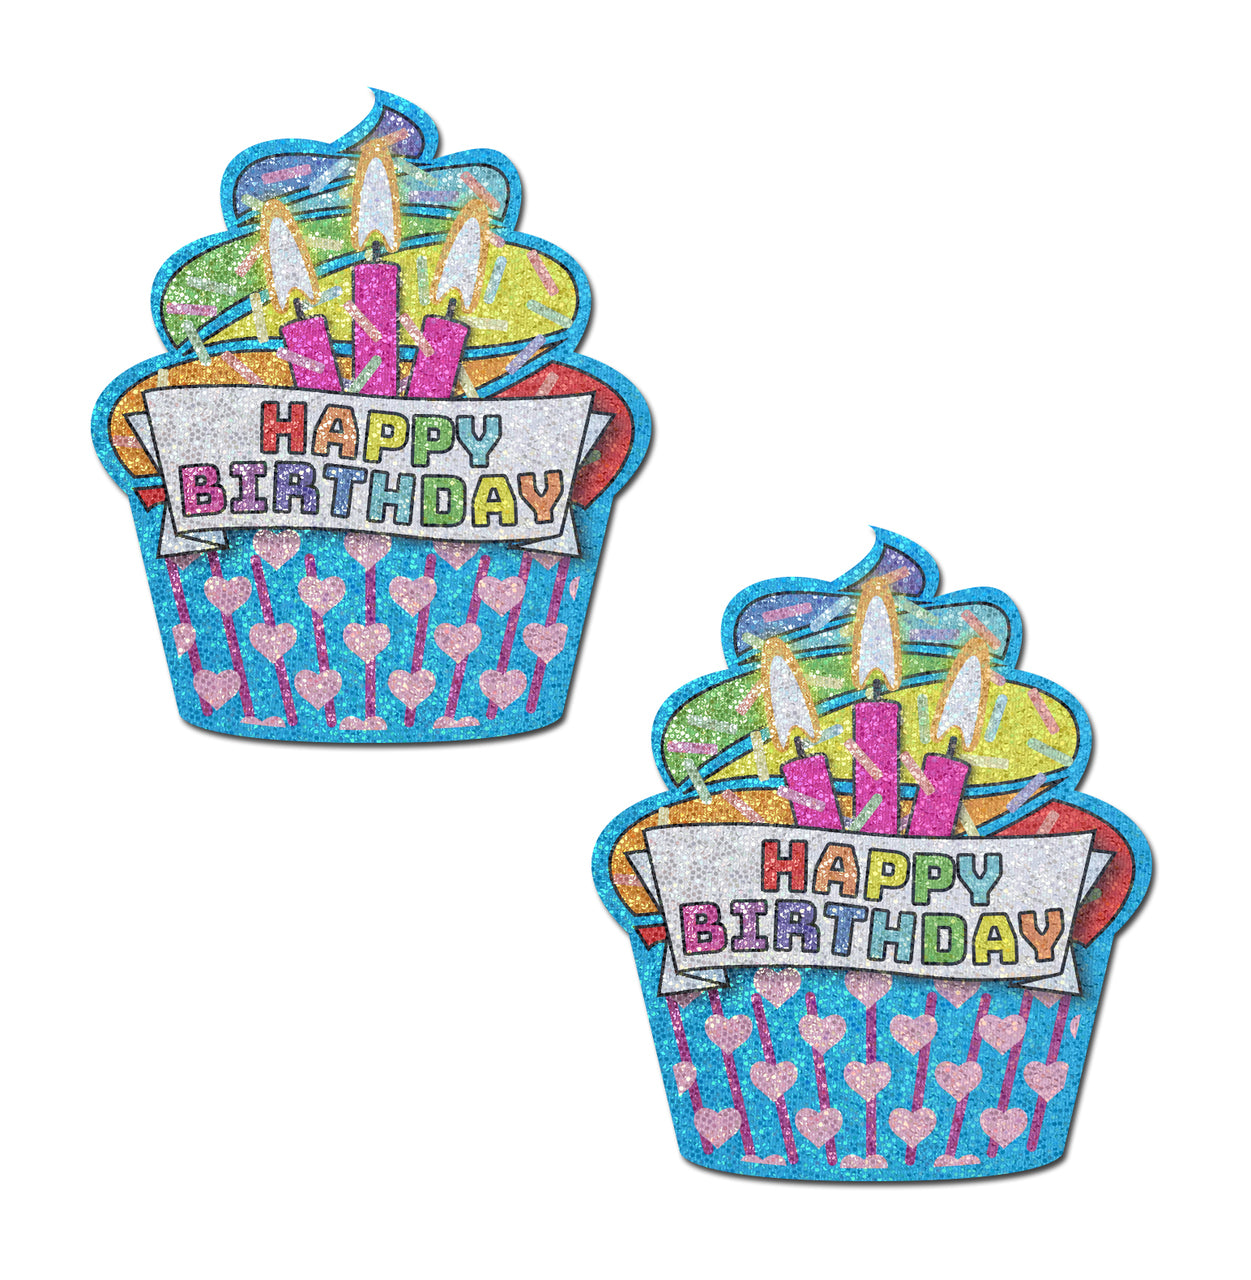 Happy birthday cupcake pasties – The Beauty Cave Boutique